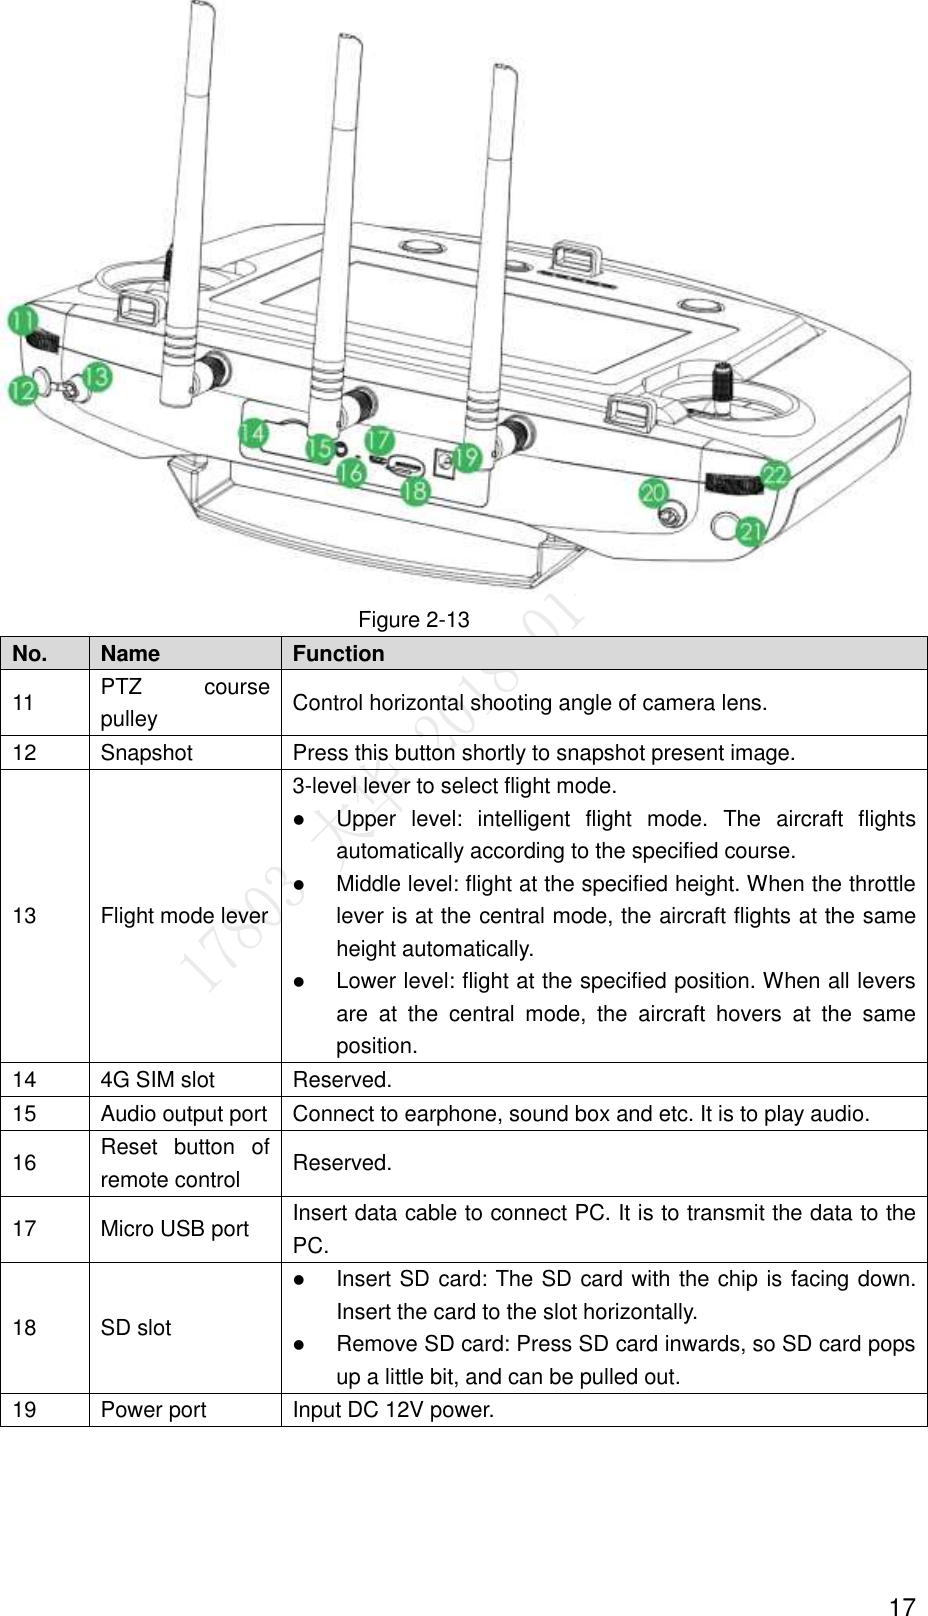  17  Figure 2-13 No. Name Function   11 PTZ  course pulley Control horizontal shooting angle of camera lens.   12 Snapshot   Press this button shortly to snapshot present image.   13 Flight mode lever 3-level lever to select flight mode.  Upper  level:  intelligent  flight  mode.  The  aircraft  flights automatically according to the specified course.    Middle level: flight at the specified height. When the throttle lever is at the central mode, the aircraft flights at the same height automatically.    Lower level: flight at the specified position. When all levers are  at  the  central  mode,  the  aircraft  hovers  at  the  same position.   14 4G SIM slot Reserved. 15 Audio output port Connect to earphone, sound box and etc. It is to play audio.   16 Reset  button  of remote control   Reserved.   17 Micro USB port Insert data cable to connect PC. It is to transmit the data to the PC. 18 SD slot  Insert SD card: The SD card with the chip is facing down. Insert the card to the slot horizontally.    Remove SD card: Press SD card inwards, so SD card pops up a little bit, and can be pulled out. 19 Power port Input DC 12V power. 